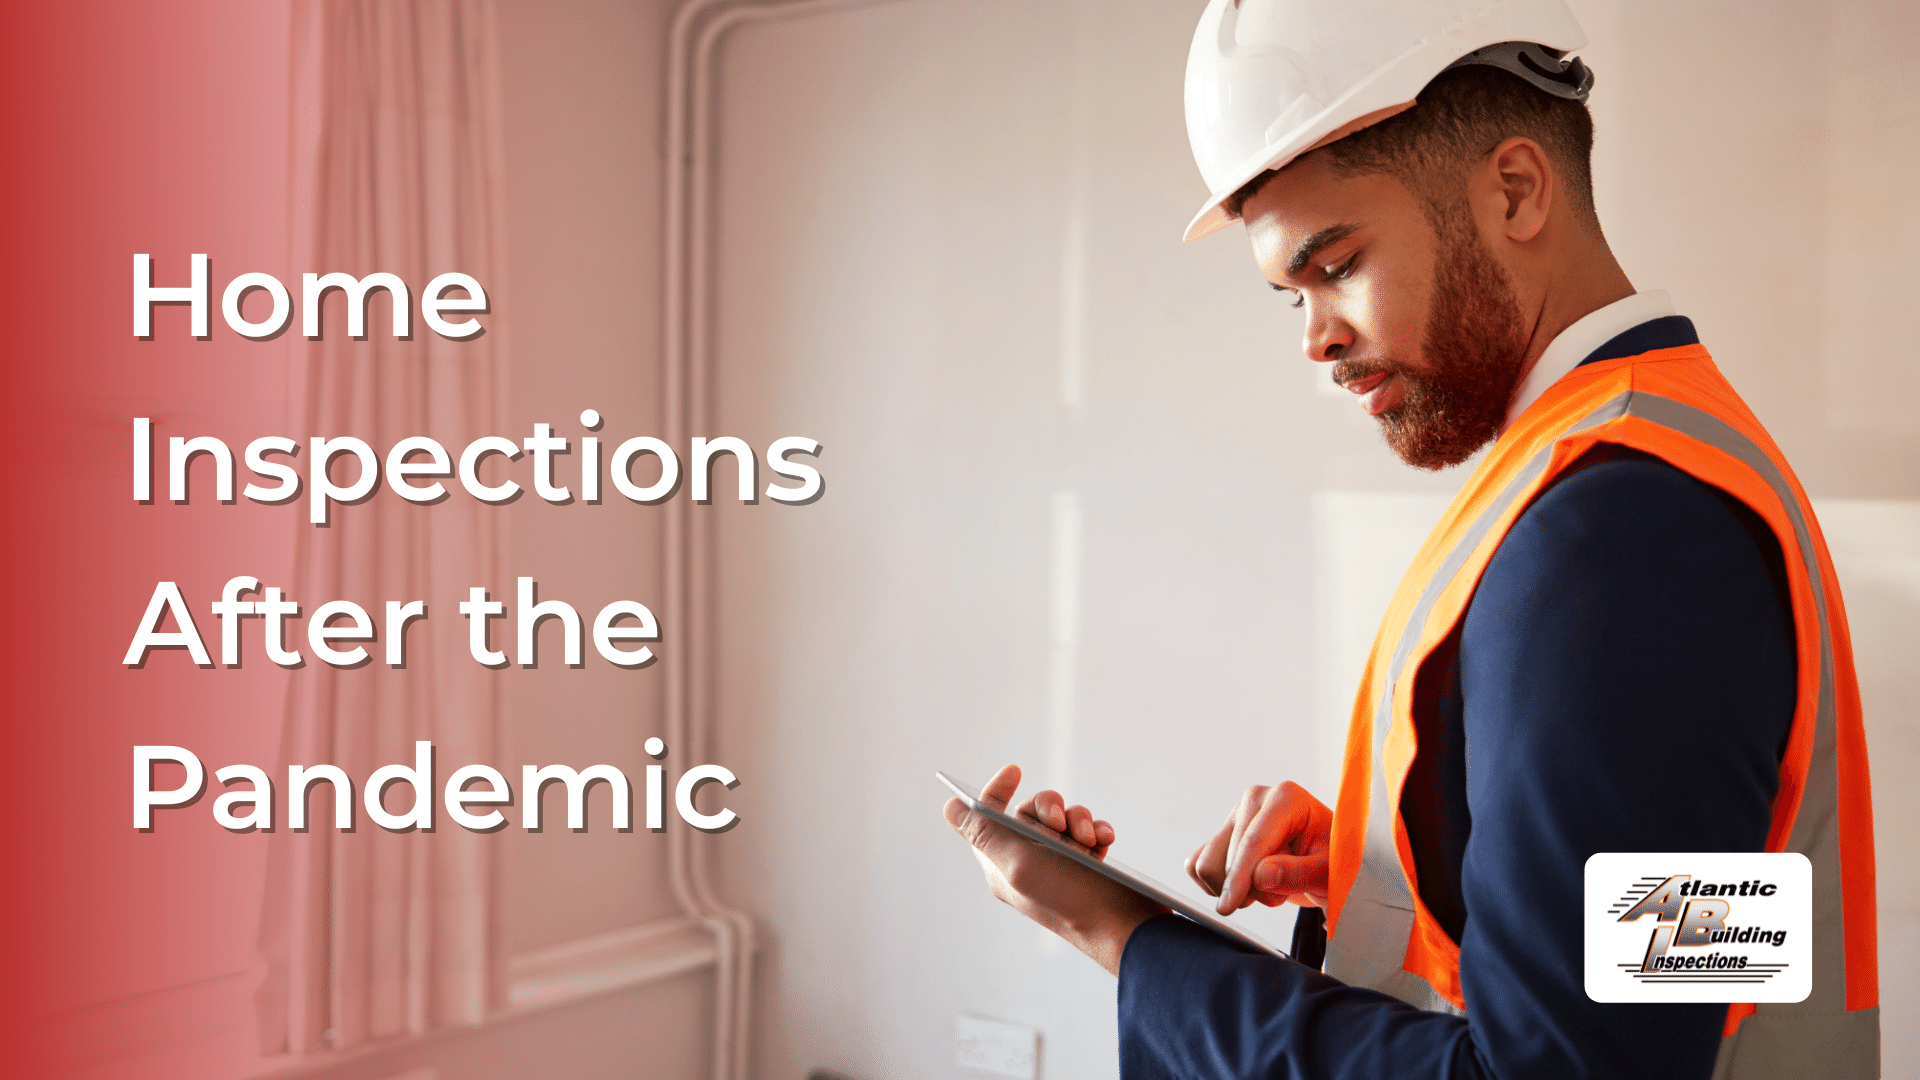 How Home Inspections Will Change After the Pandemic